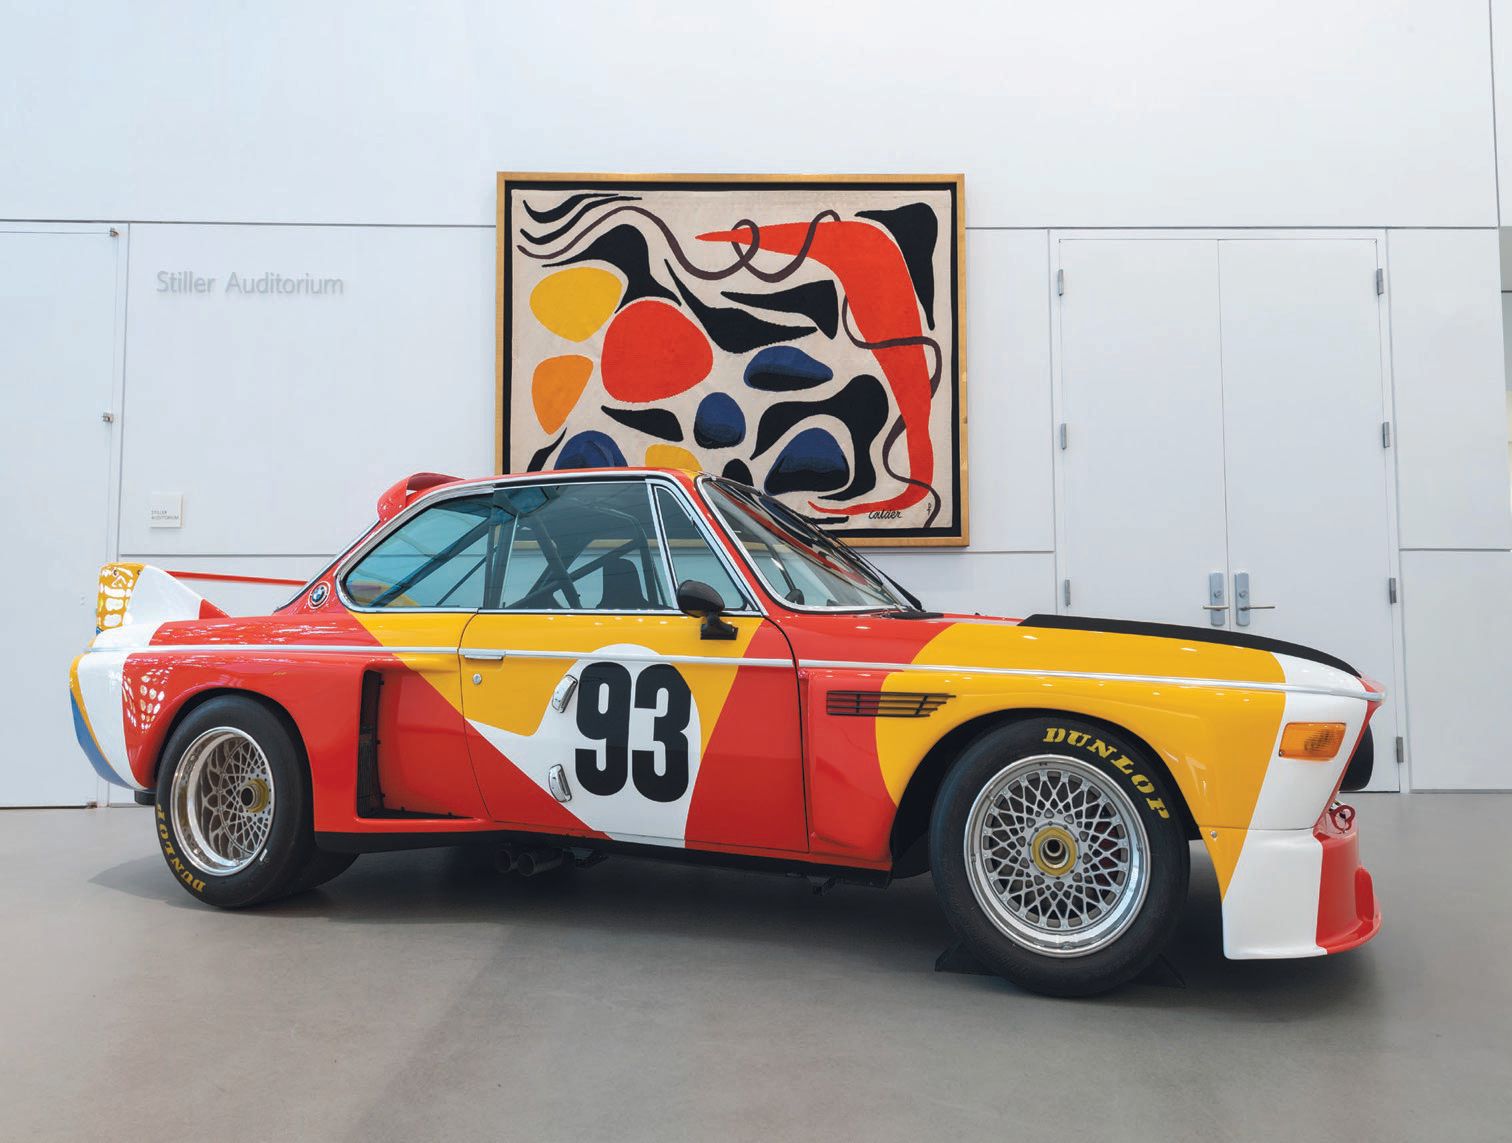 An installation view of Special Guest: Calder BMW Art Car in the Norton’s Gilbert
and Ann Maurer Auditorium Lobby PHOTO BY ASHLEY KERR